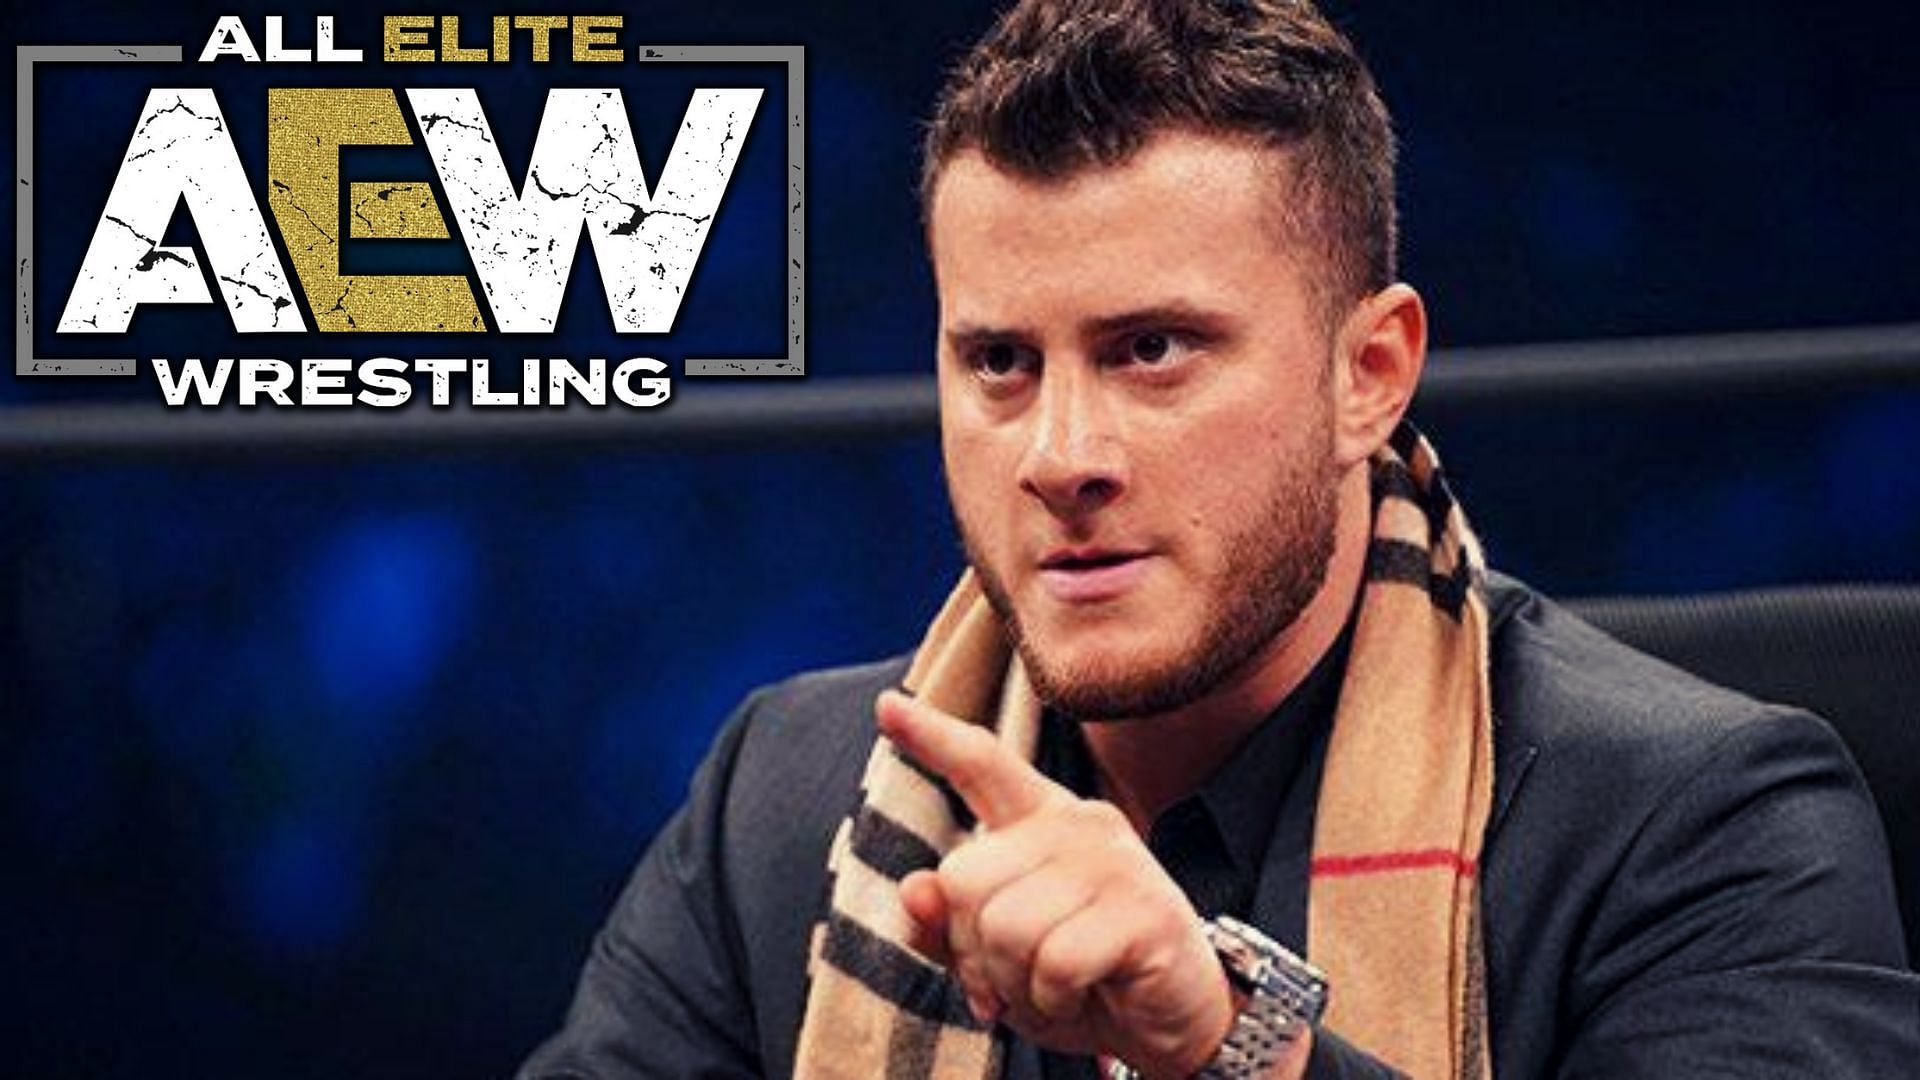 MJF is the reigning AEW World Champion.